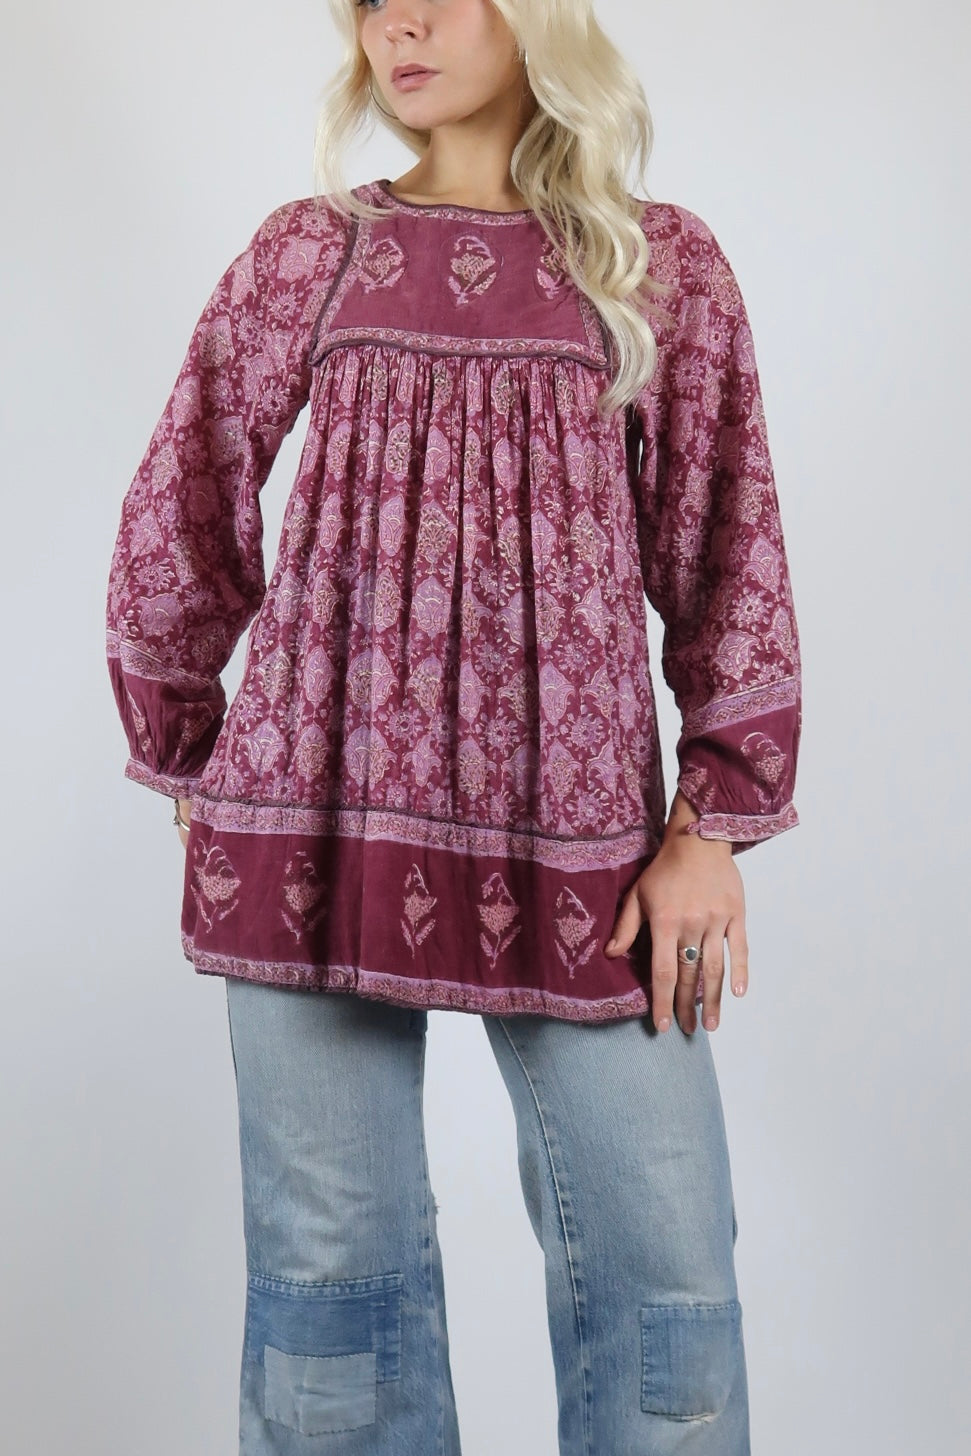 1970s Indian tunic blouse